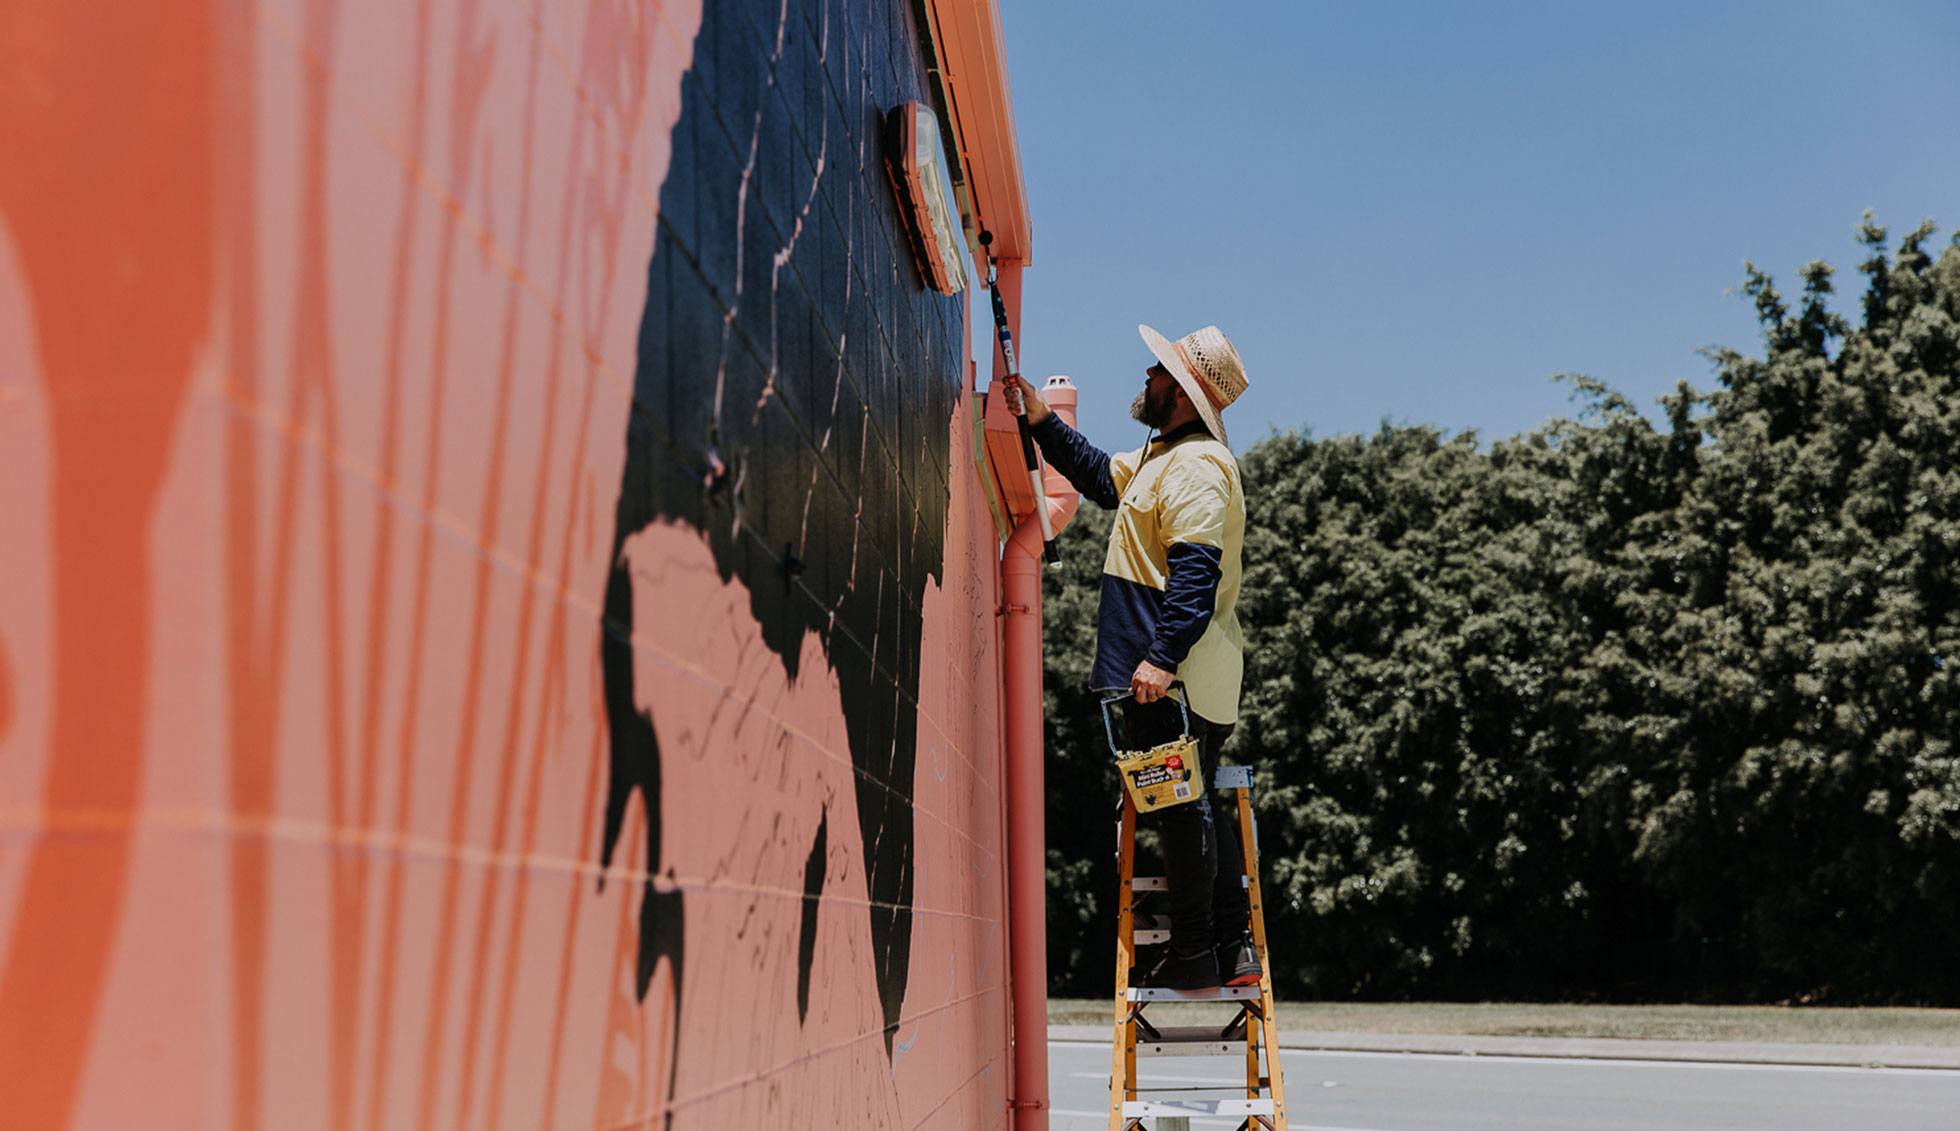 A mural artist paints an outdoor mural on a public wall. He paints a bird local to the area to make a meaningful art piece to residents.